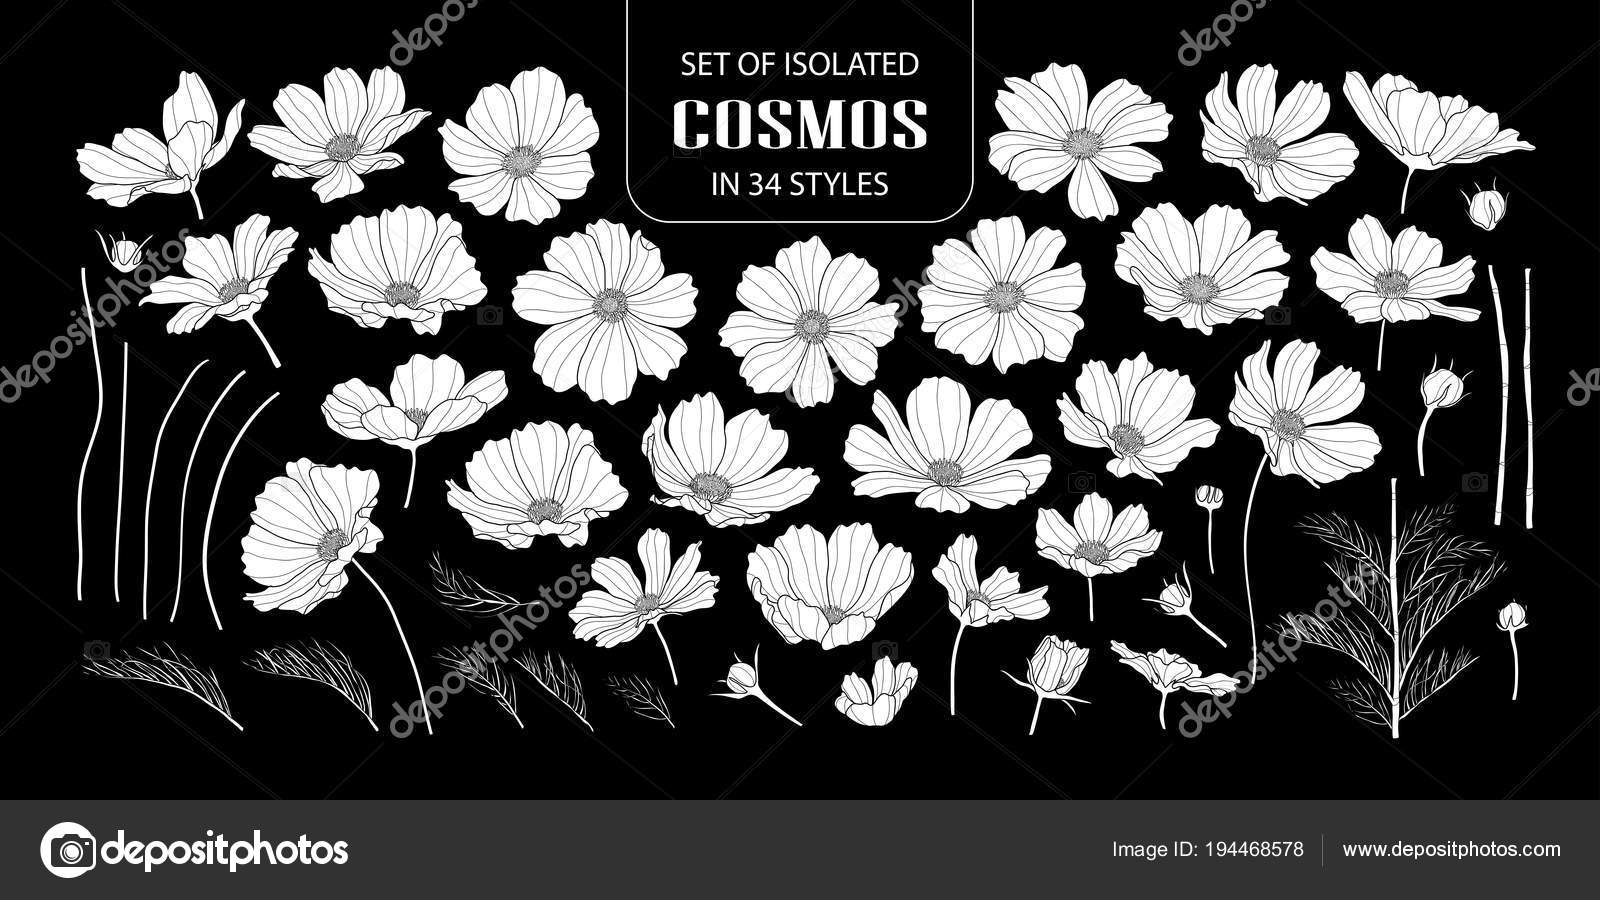 Set Of Isolated White Silhouette Cosmos In 34 Styles Stock Vector C Plawarn